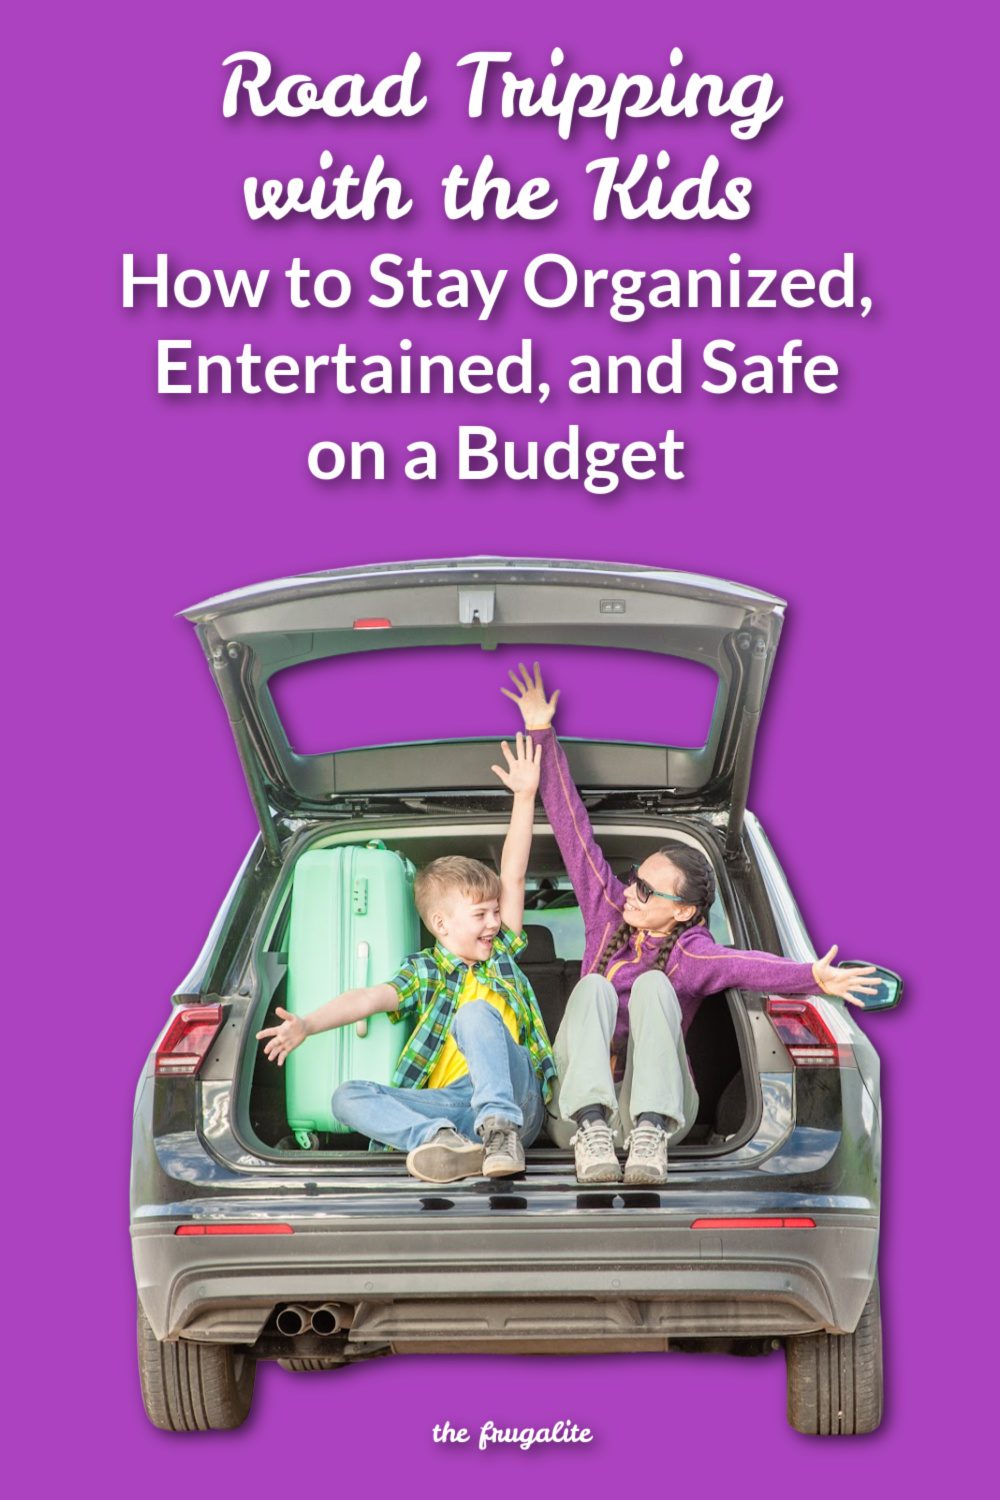 Road Tripping with the Kids: How to Stay Organized, Entertained, and Safe on a Budget